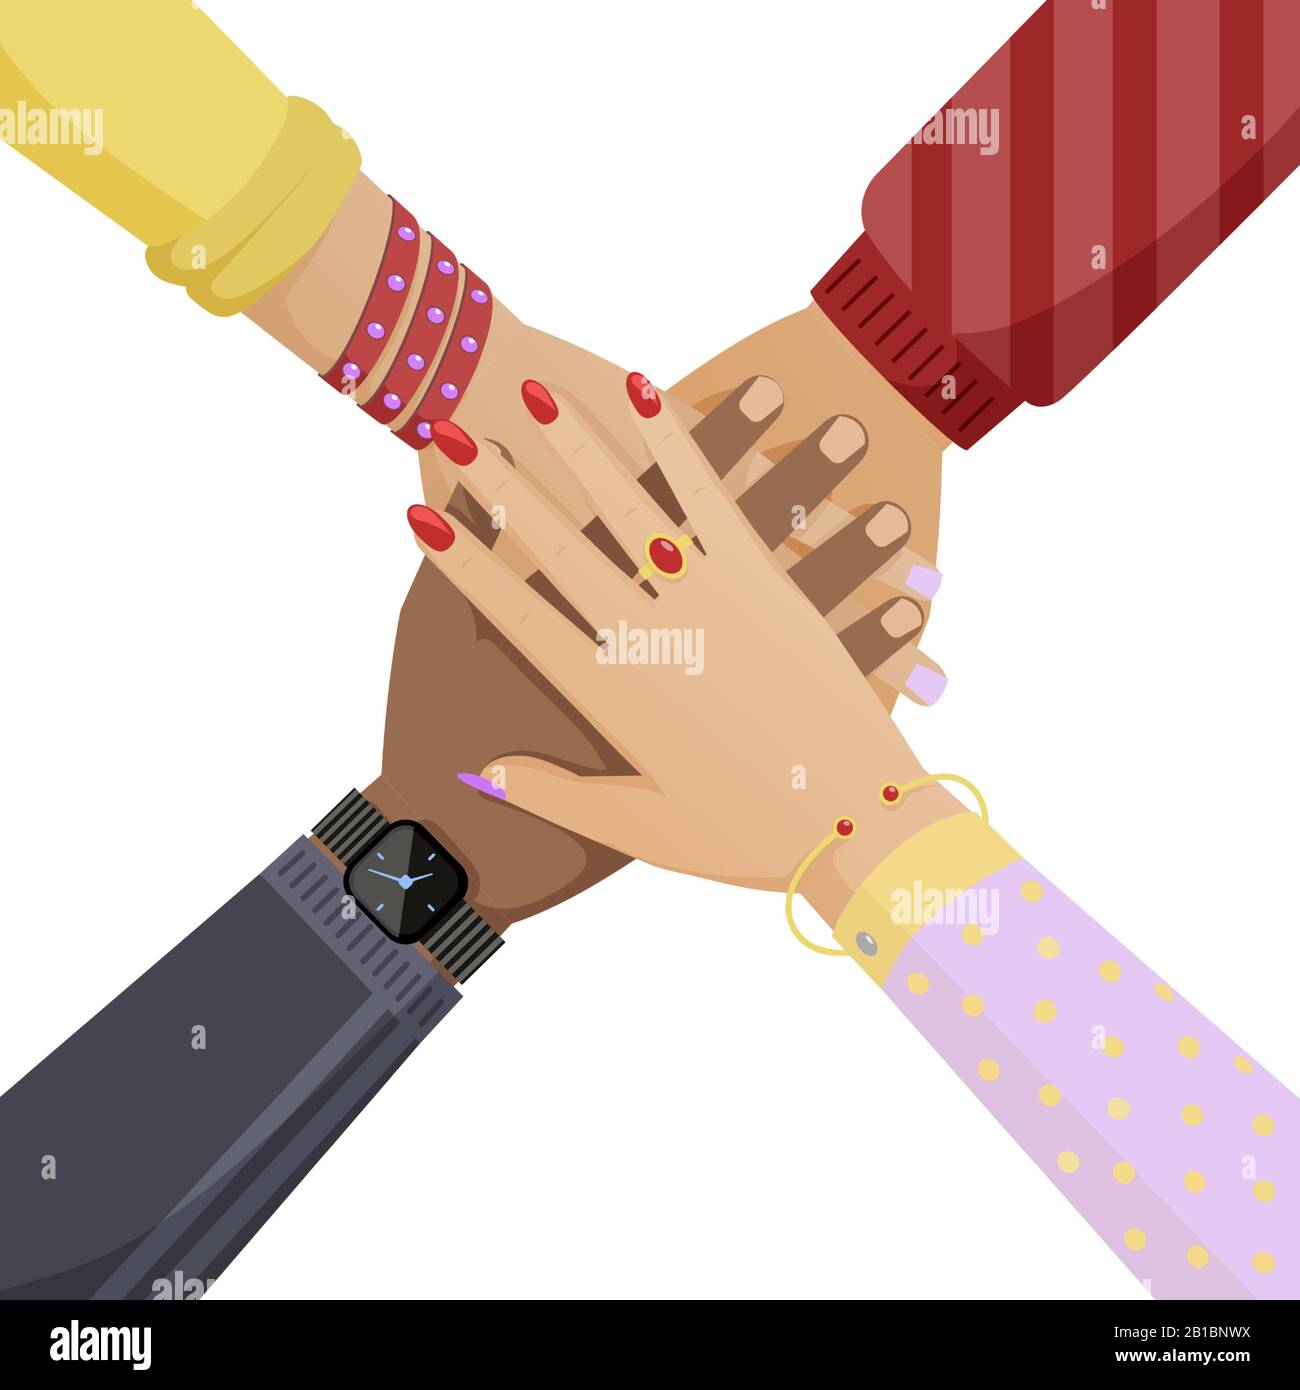 People hands with watches, rings and bracelets putting on each other. Women and men arms together flat vector illustration. Teamwork, social community, cooperation cartoon concept. Stock Vector